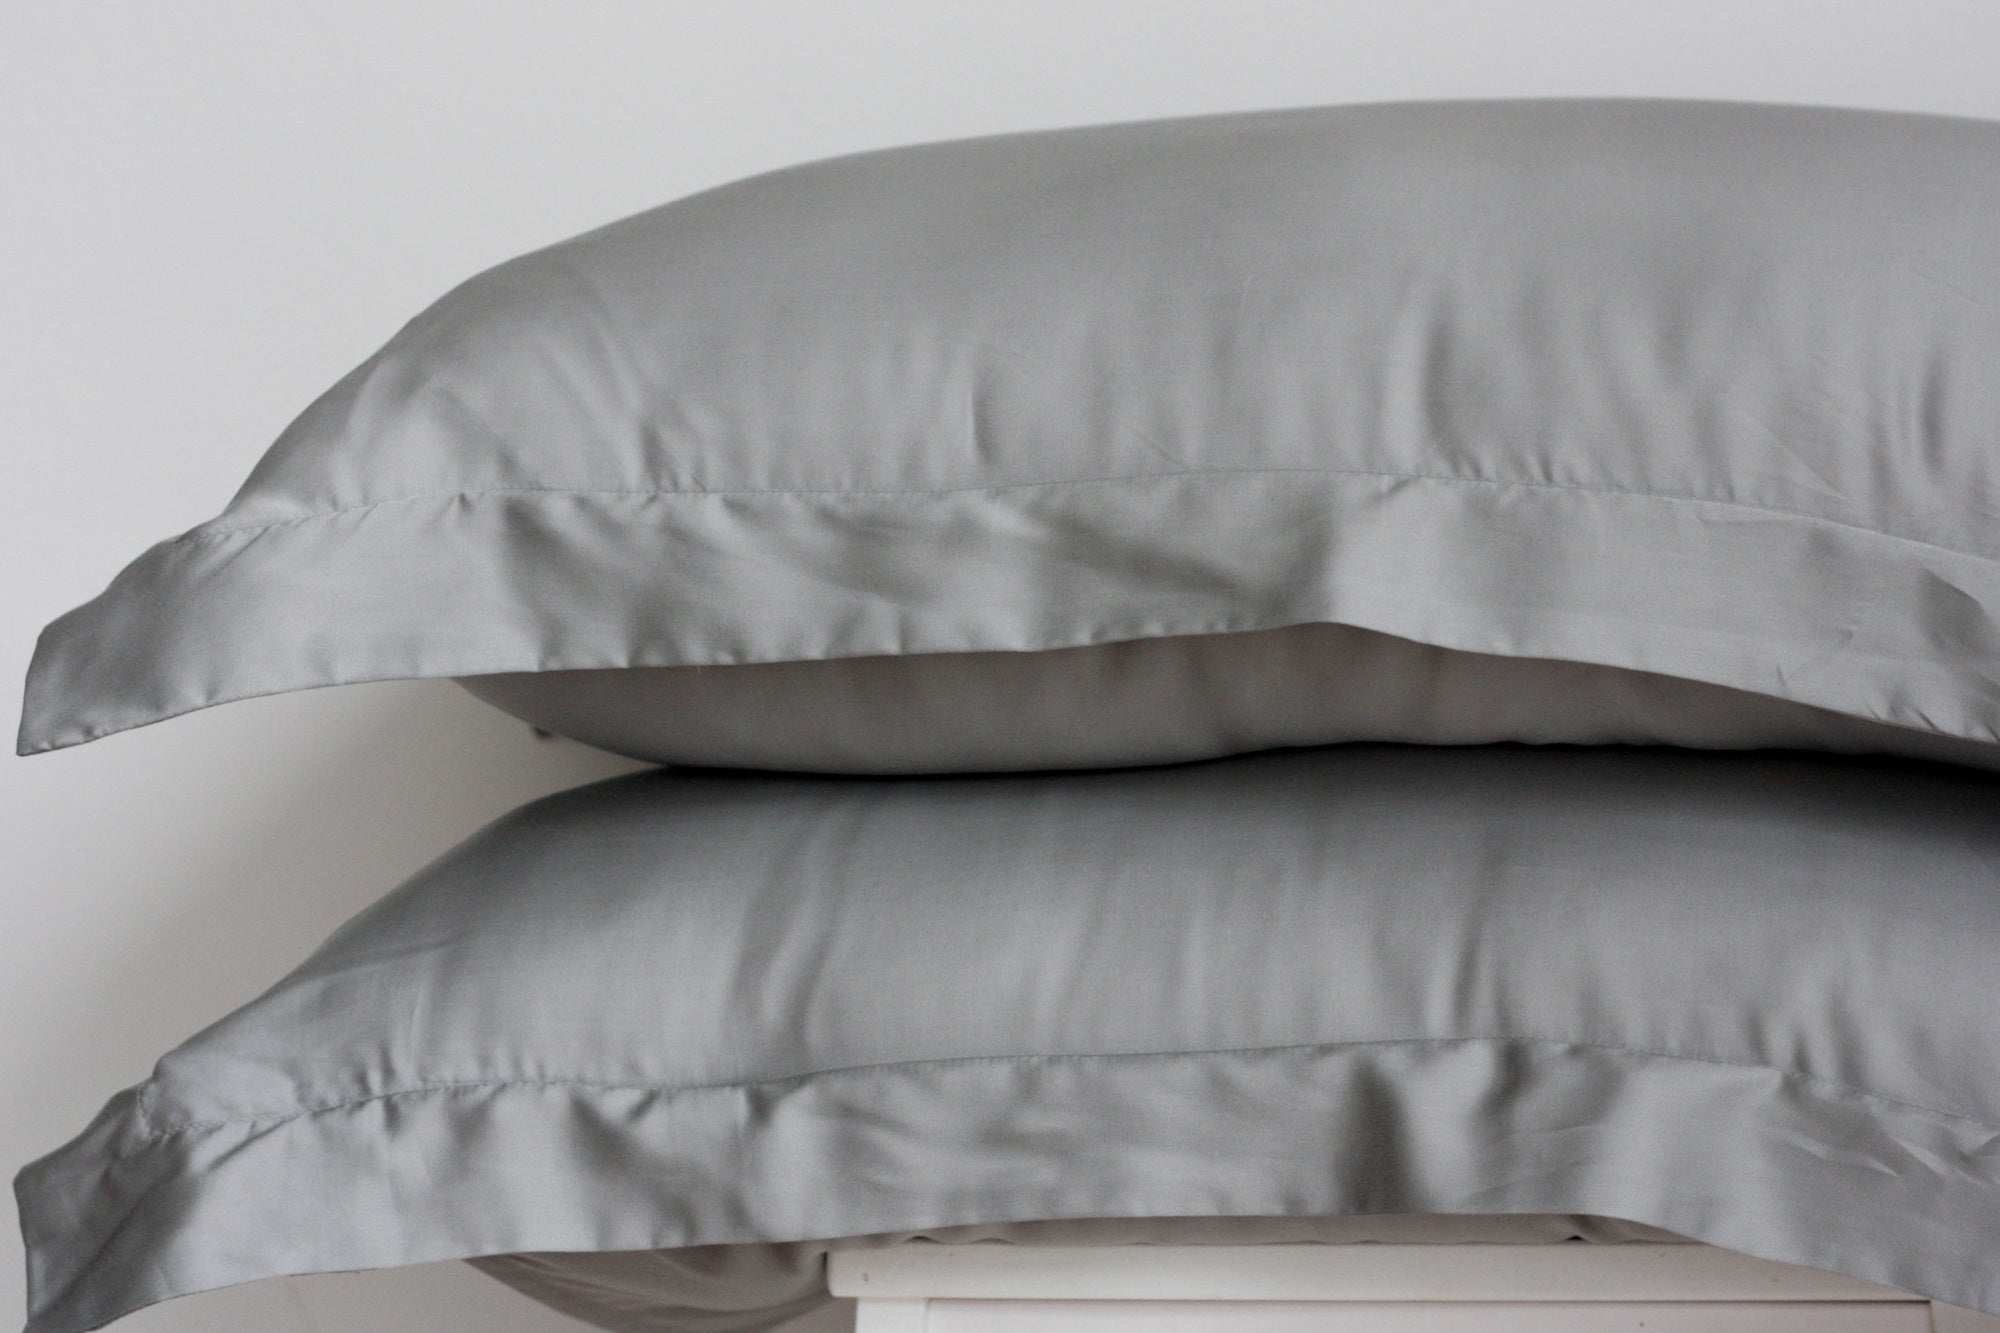 Are increasingly popular silk pillowcases really worth the hype?